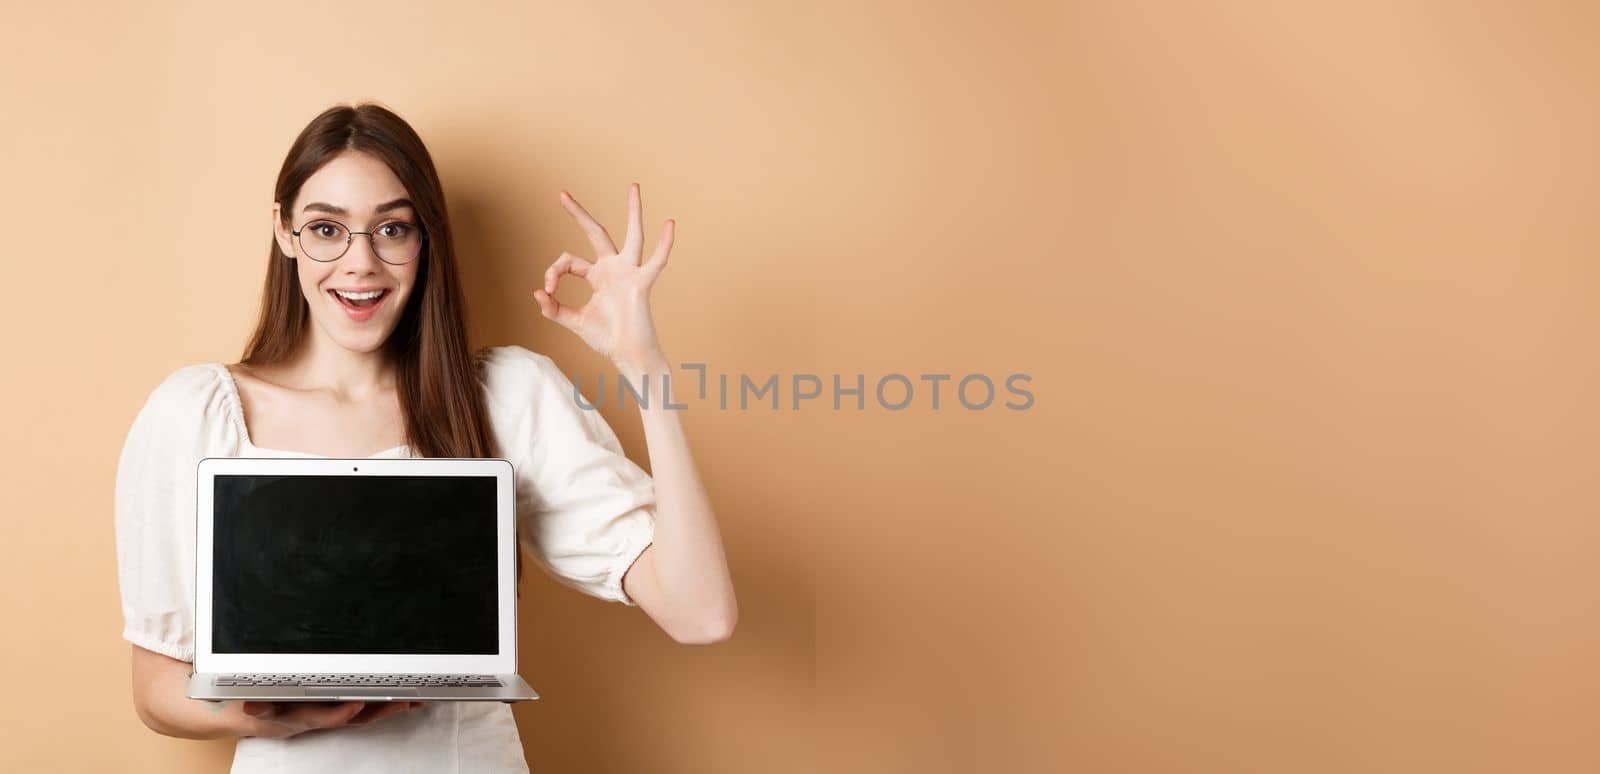 E-commerce. Excited young woman in glasses showing okay sign and laptop screen, recommending internet promo, standing on beige background.